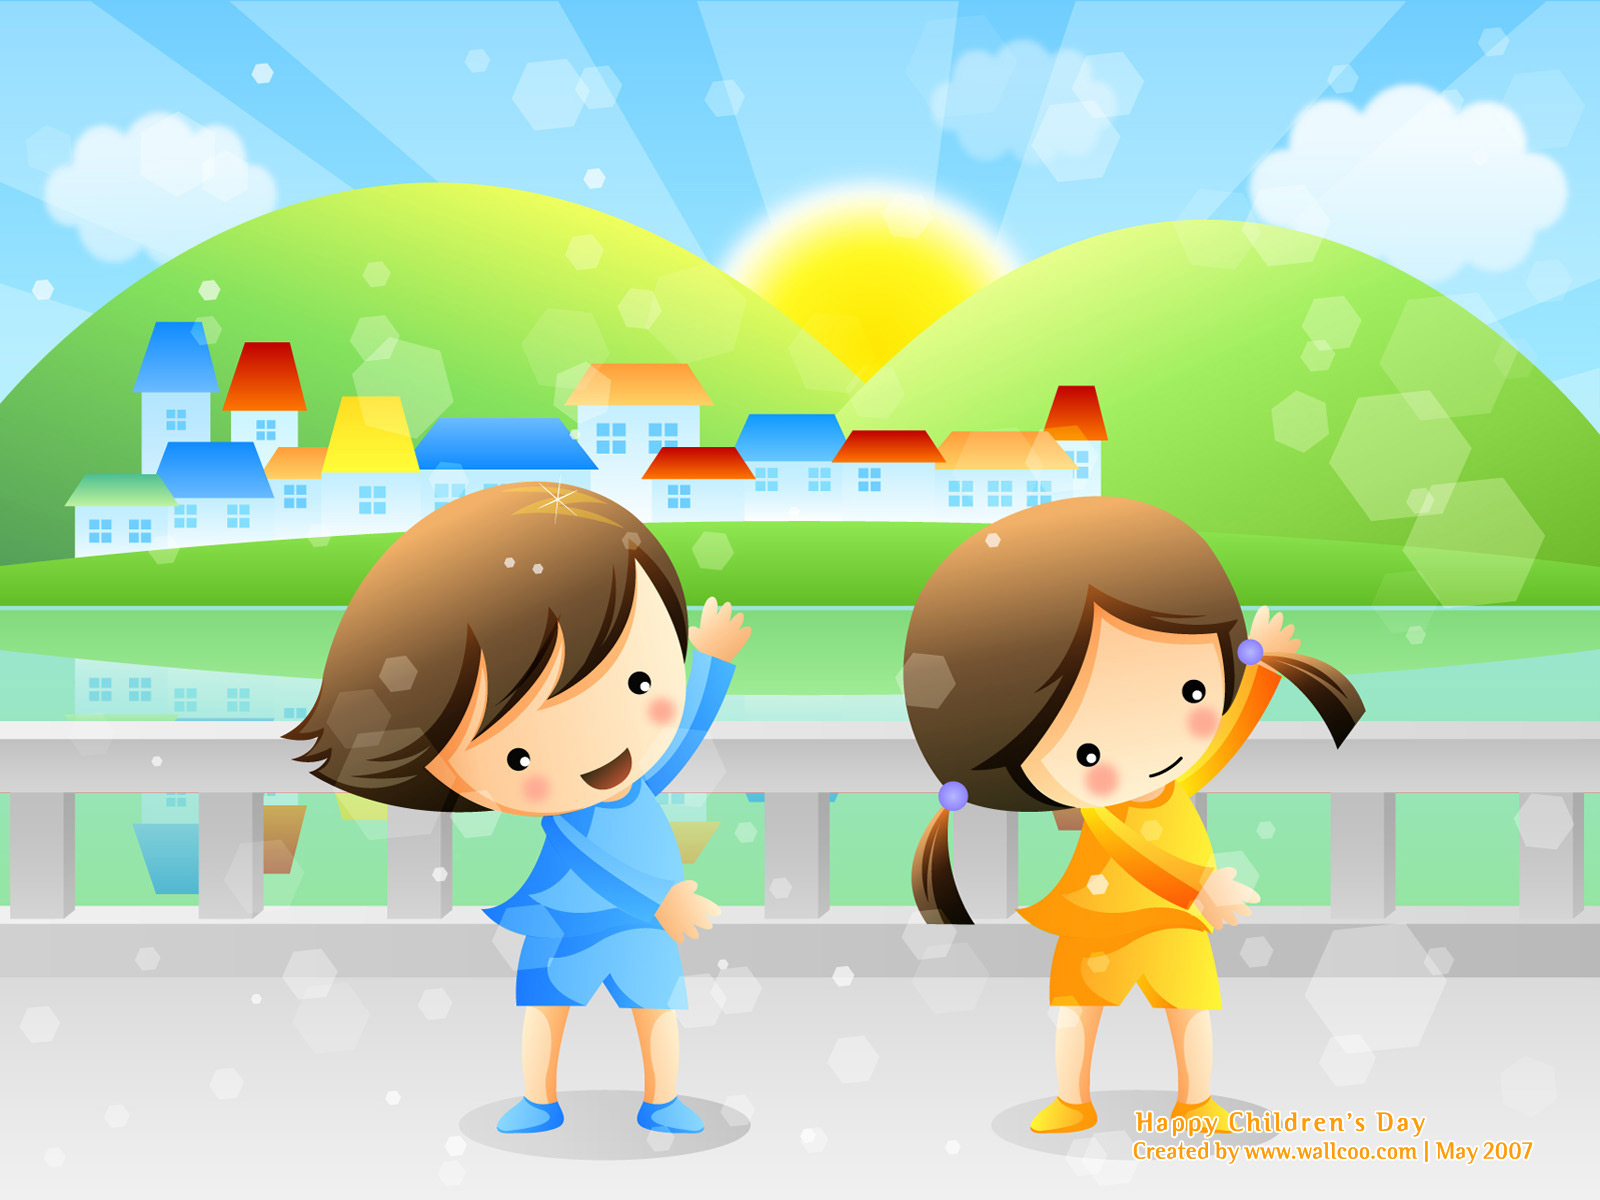 Childrens Day PowerPoint Backgrounds and Wallpapers   PPT Garden